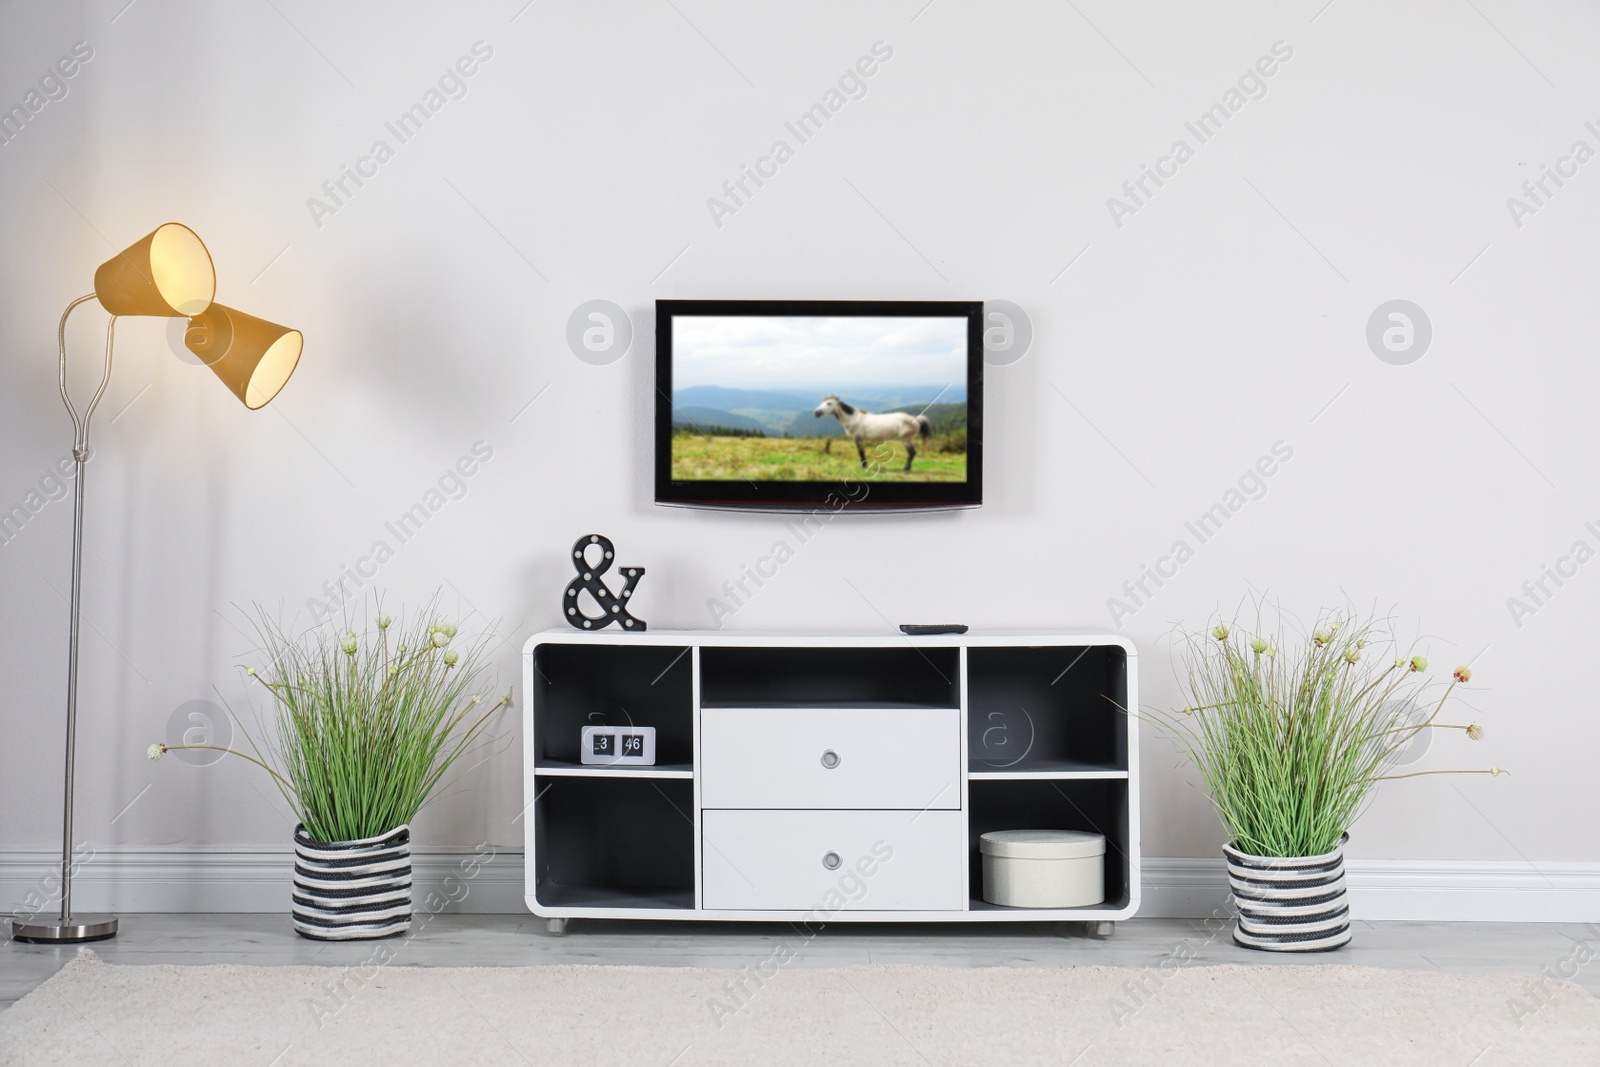 Image of Living room interior with TV set on light wall